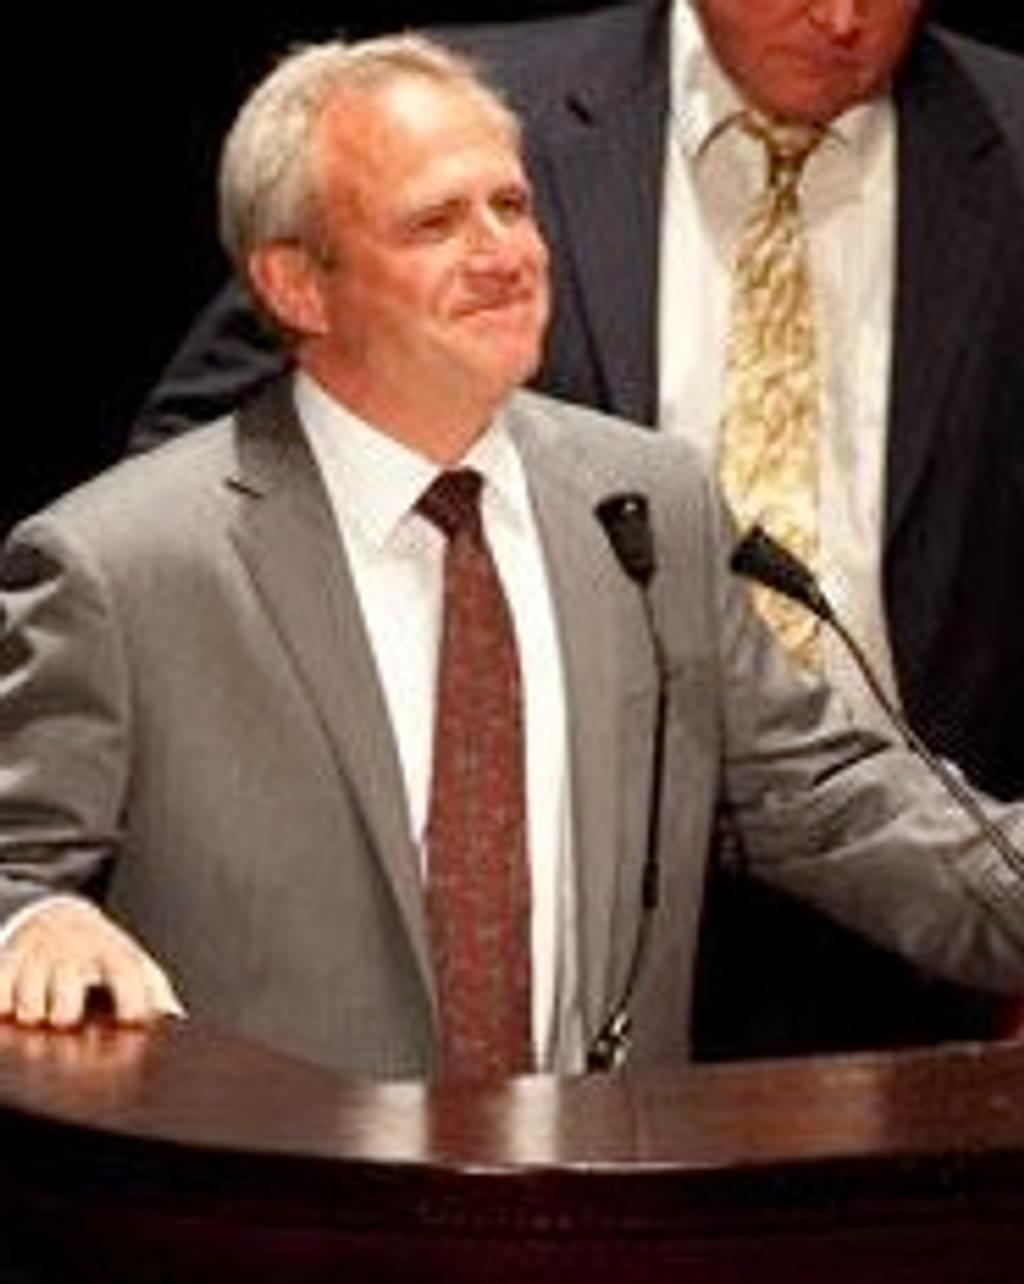 Texas Enacts "Michael Morton Act" Intended to Reduce Wrongful Convictions